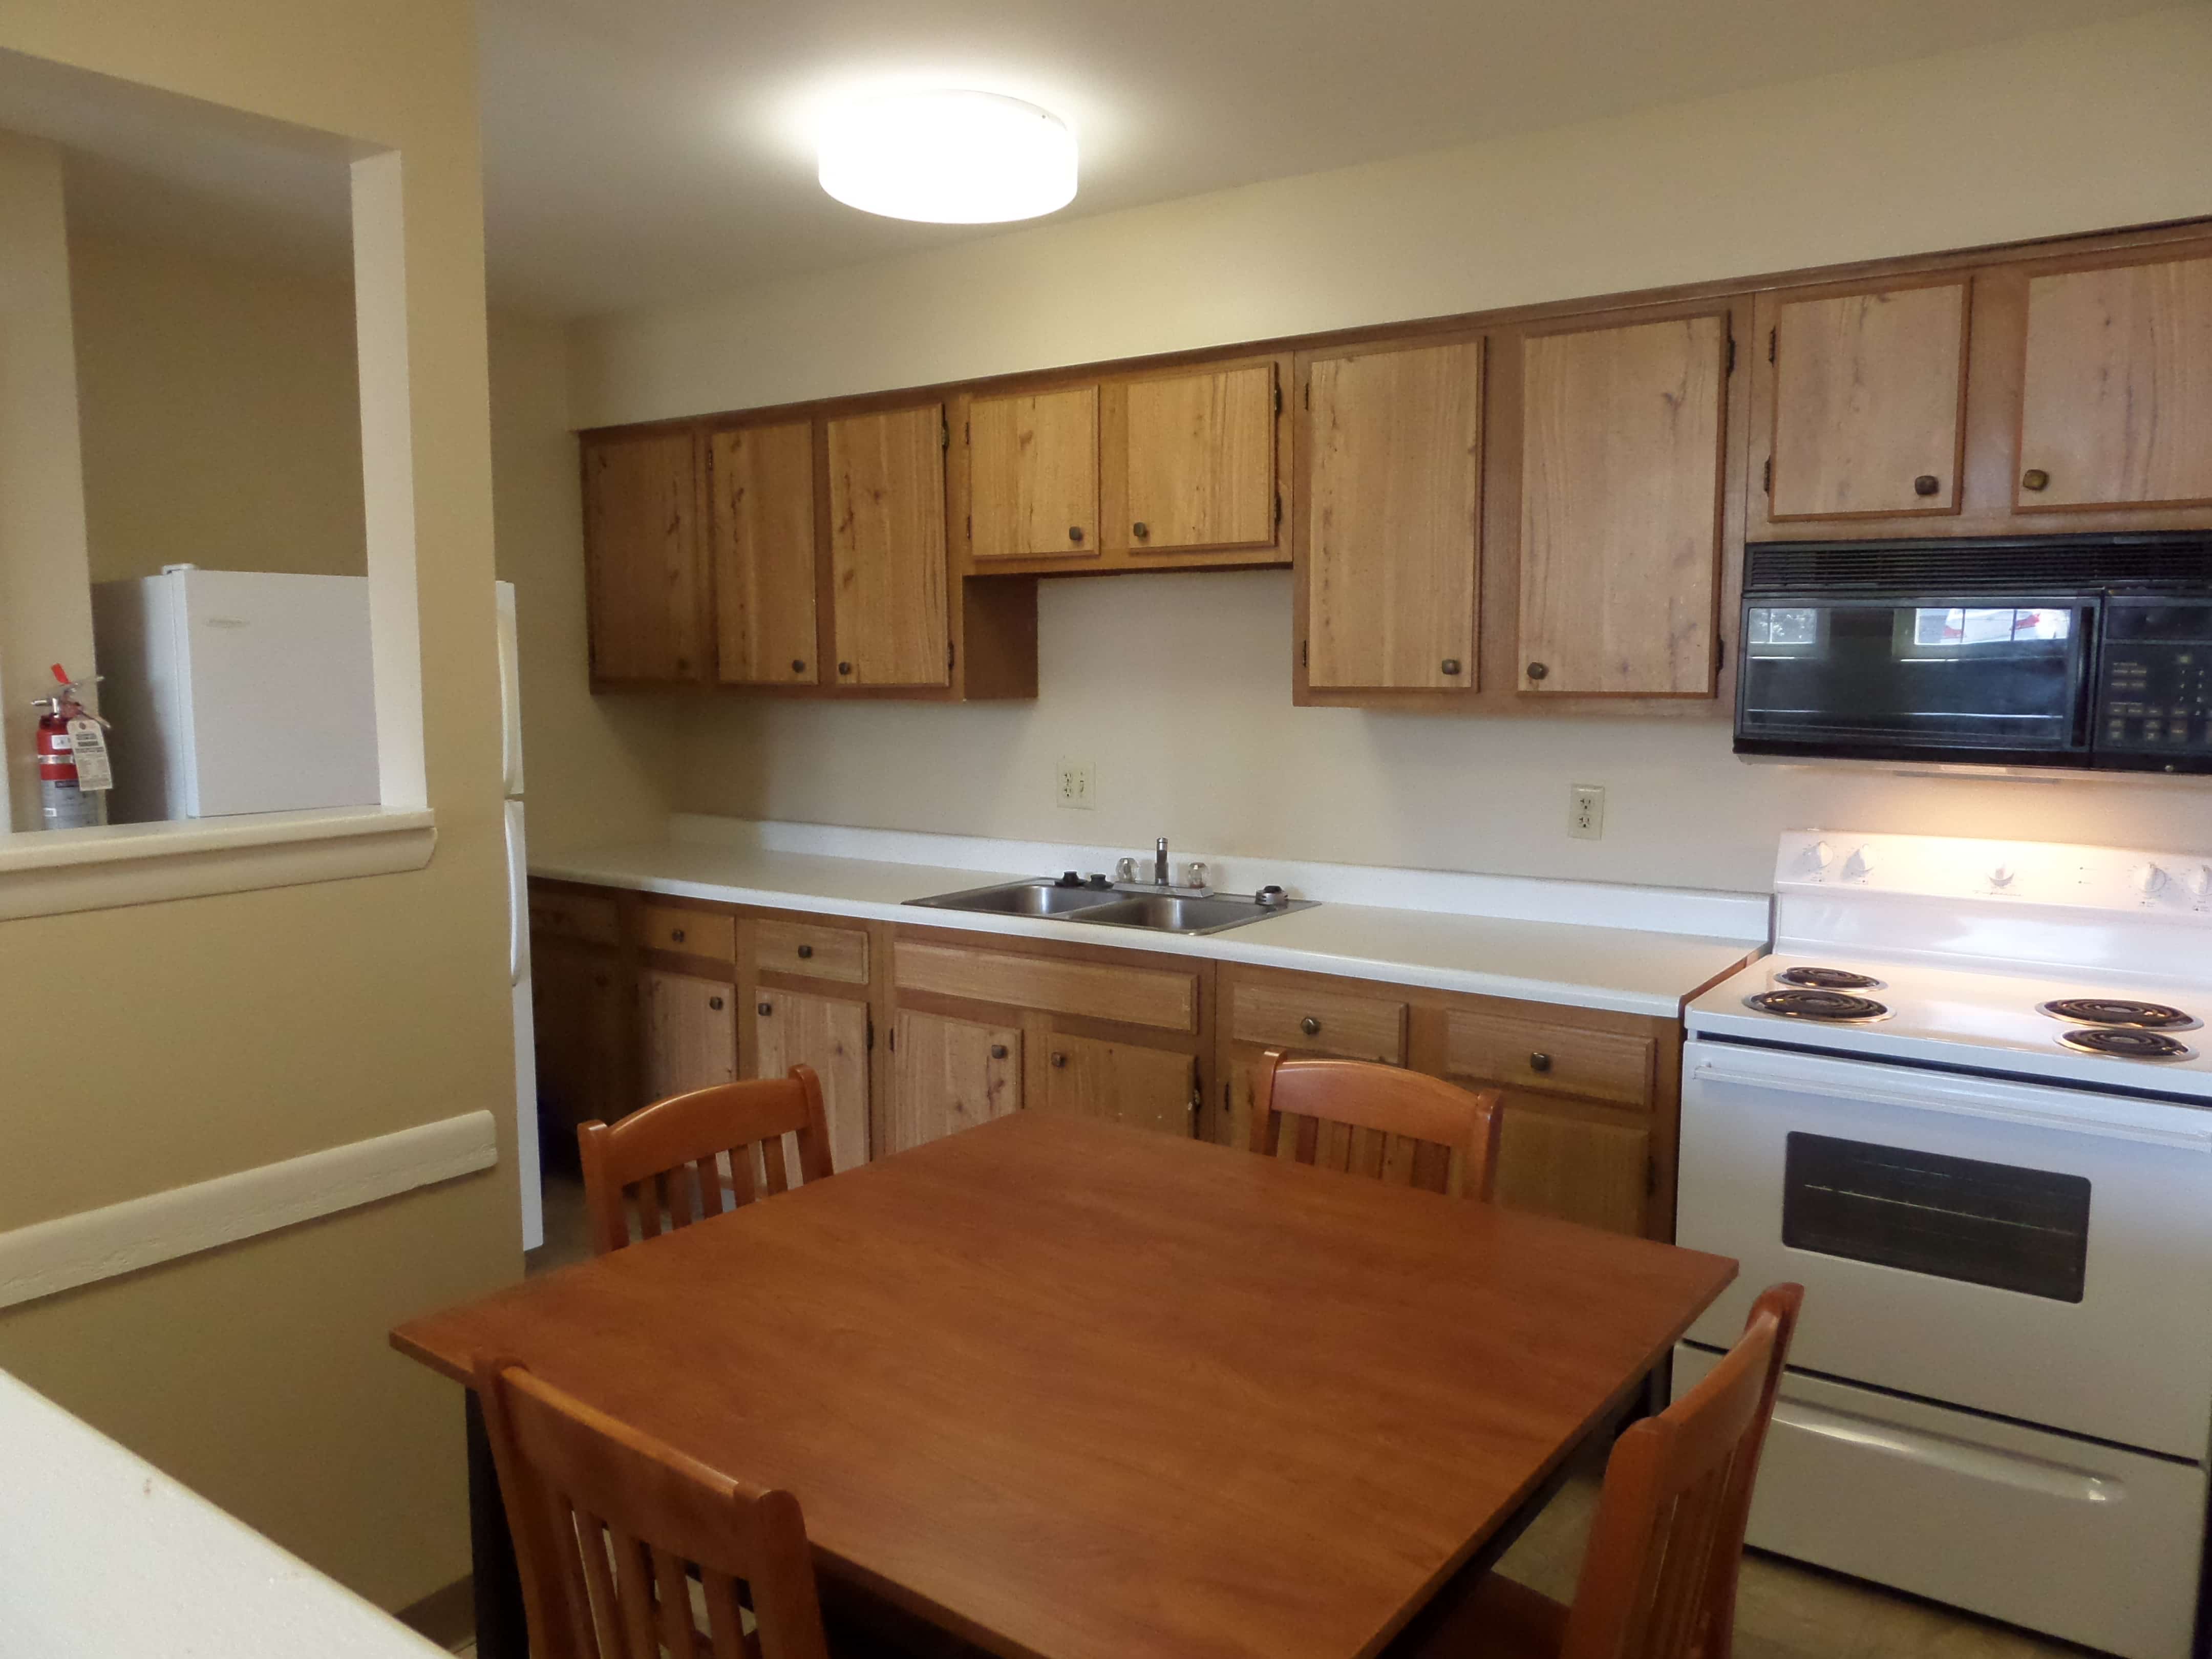 Spacious kitchen, with large fridge, microwave, stove, dining table and chairs